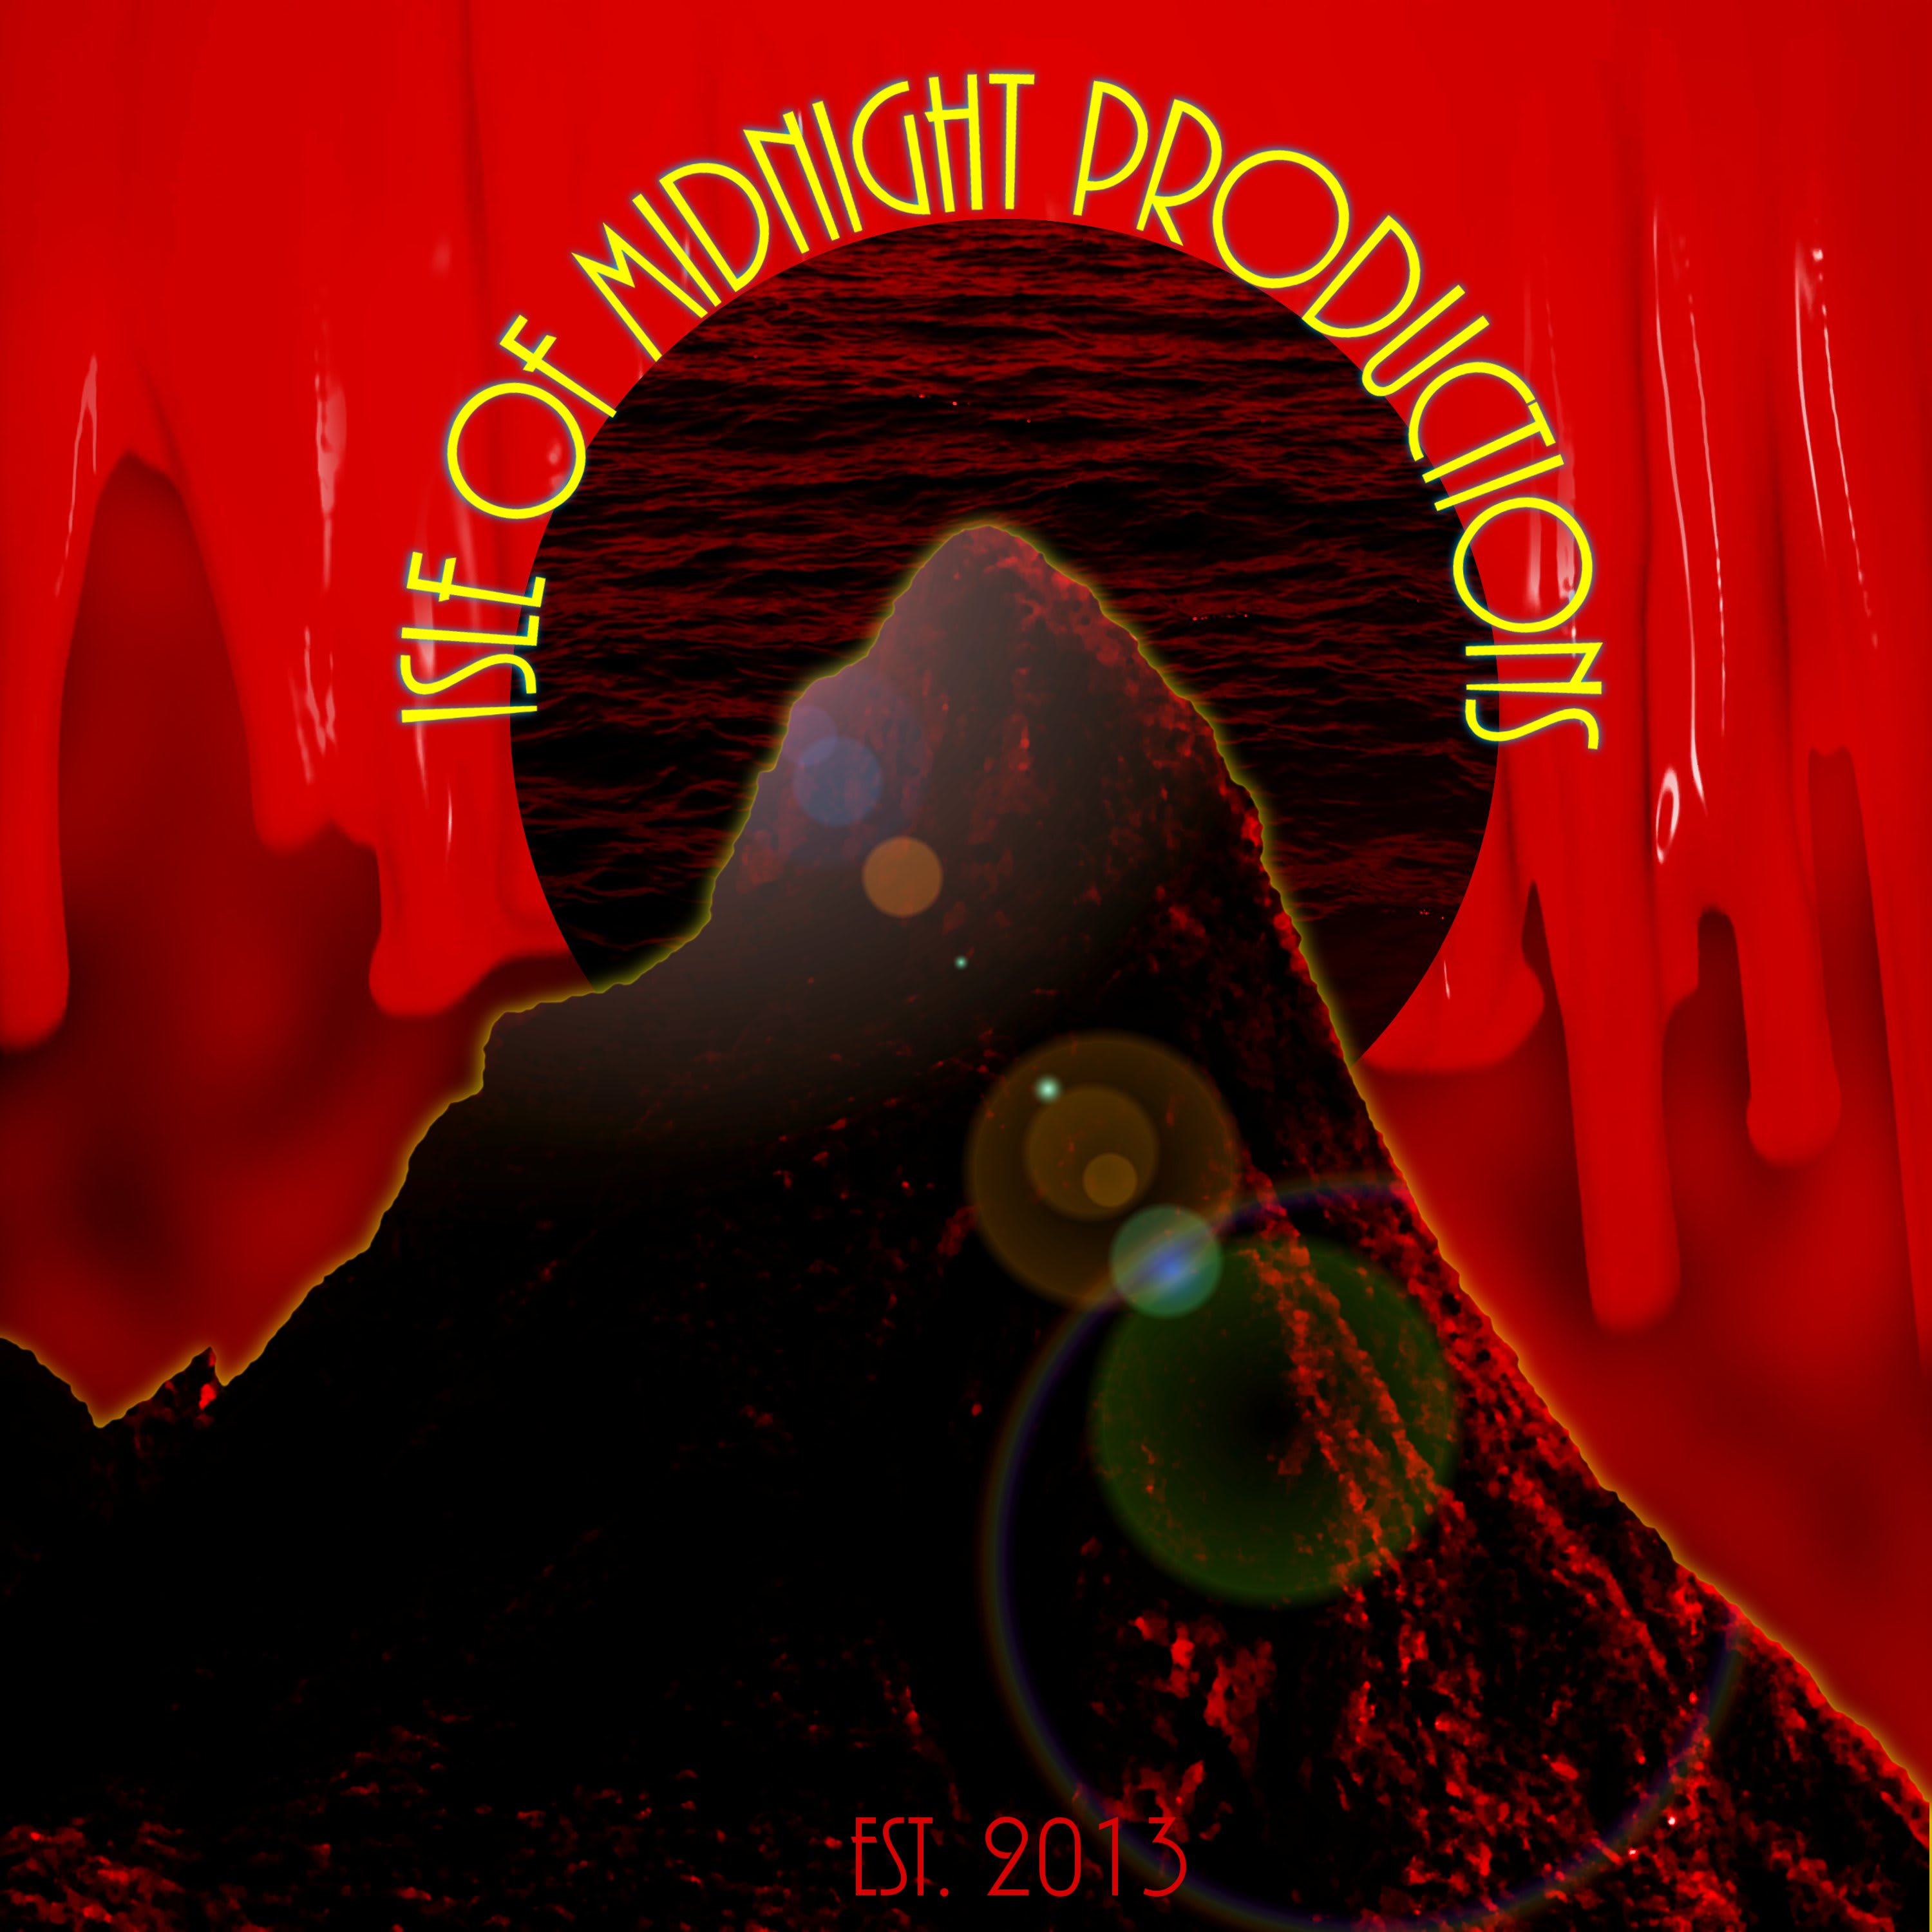 Isle Of Midnight Productions